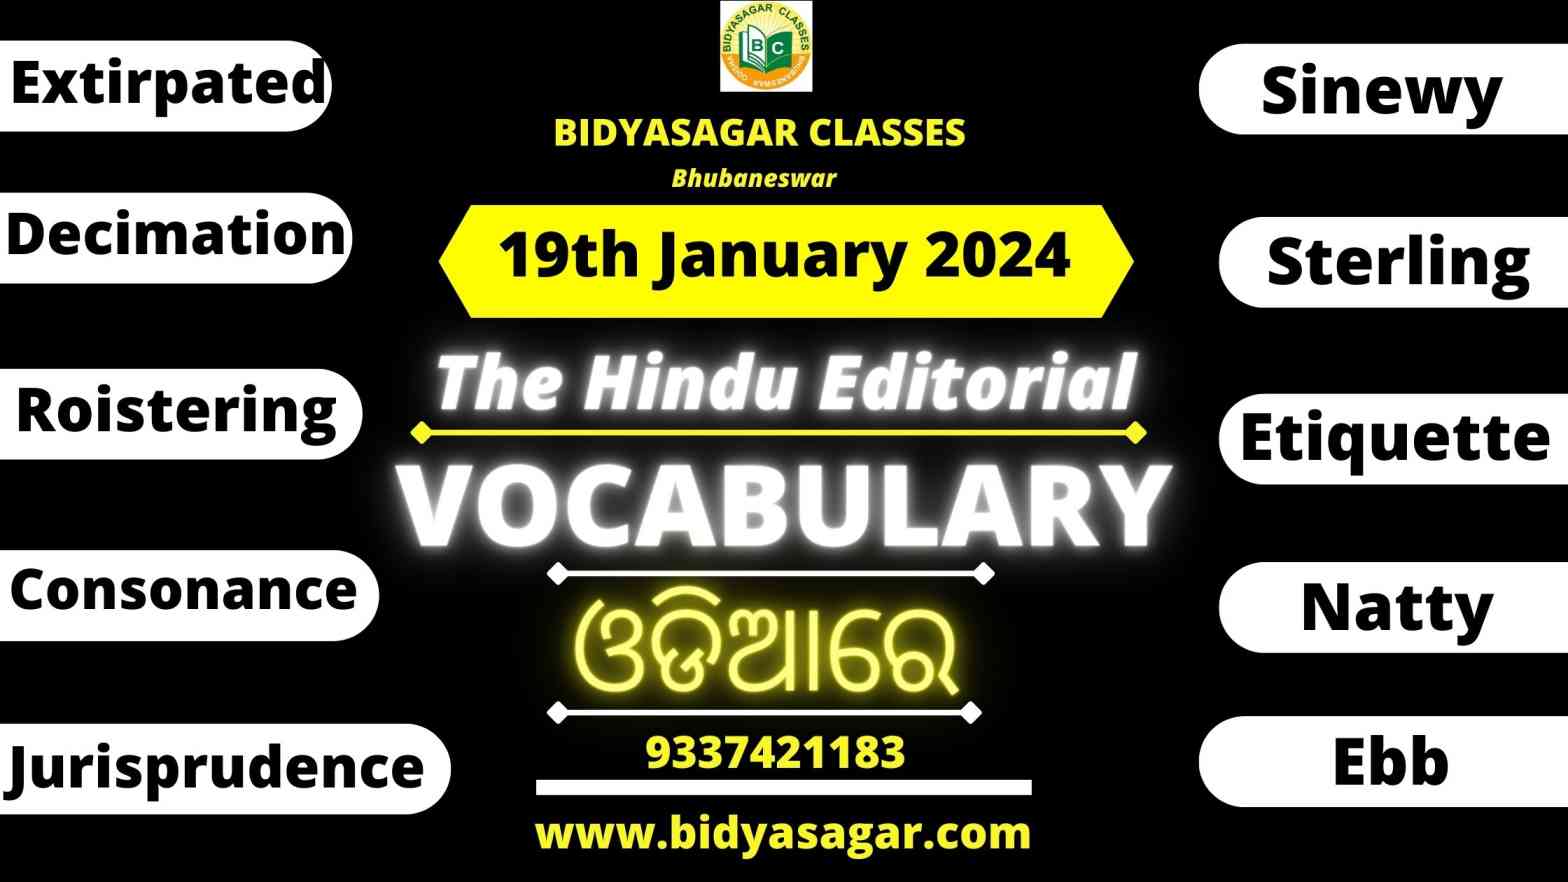 The Hindu Editorial Vocabulary of 19th January 2024